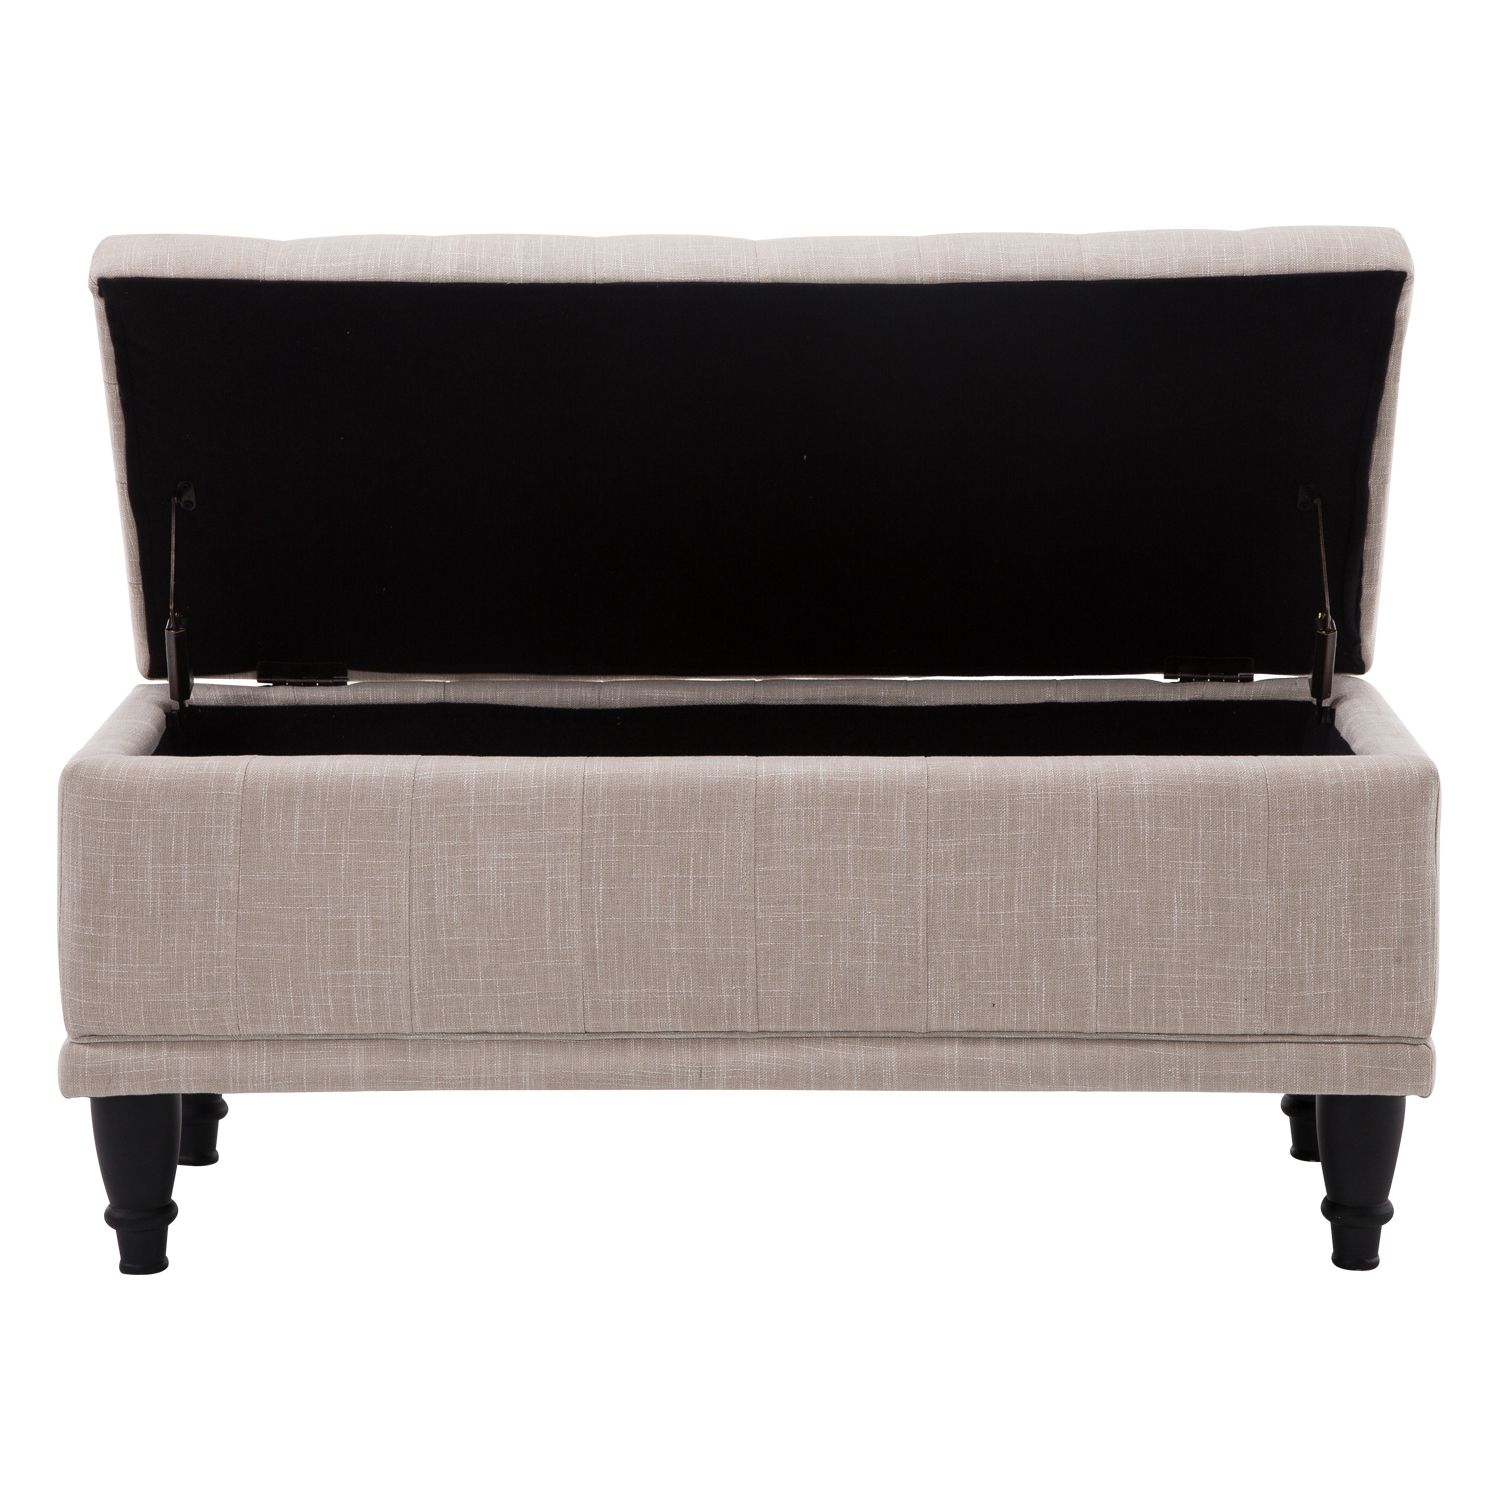 42" Lift Top Storage Ottoman Tufted Fabric Shoe Bench Footrest Stool Pertaining To Newest Linen Tufted Lift Top Storage Trunk (View 1 of 10)